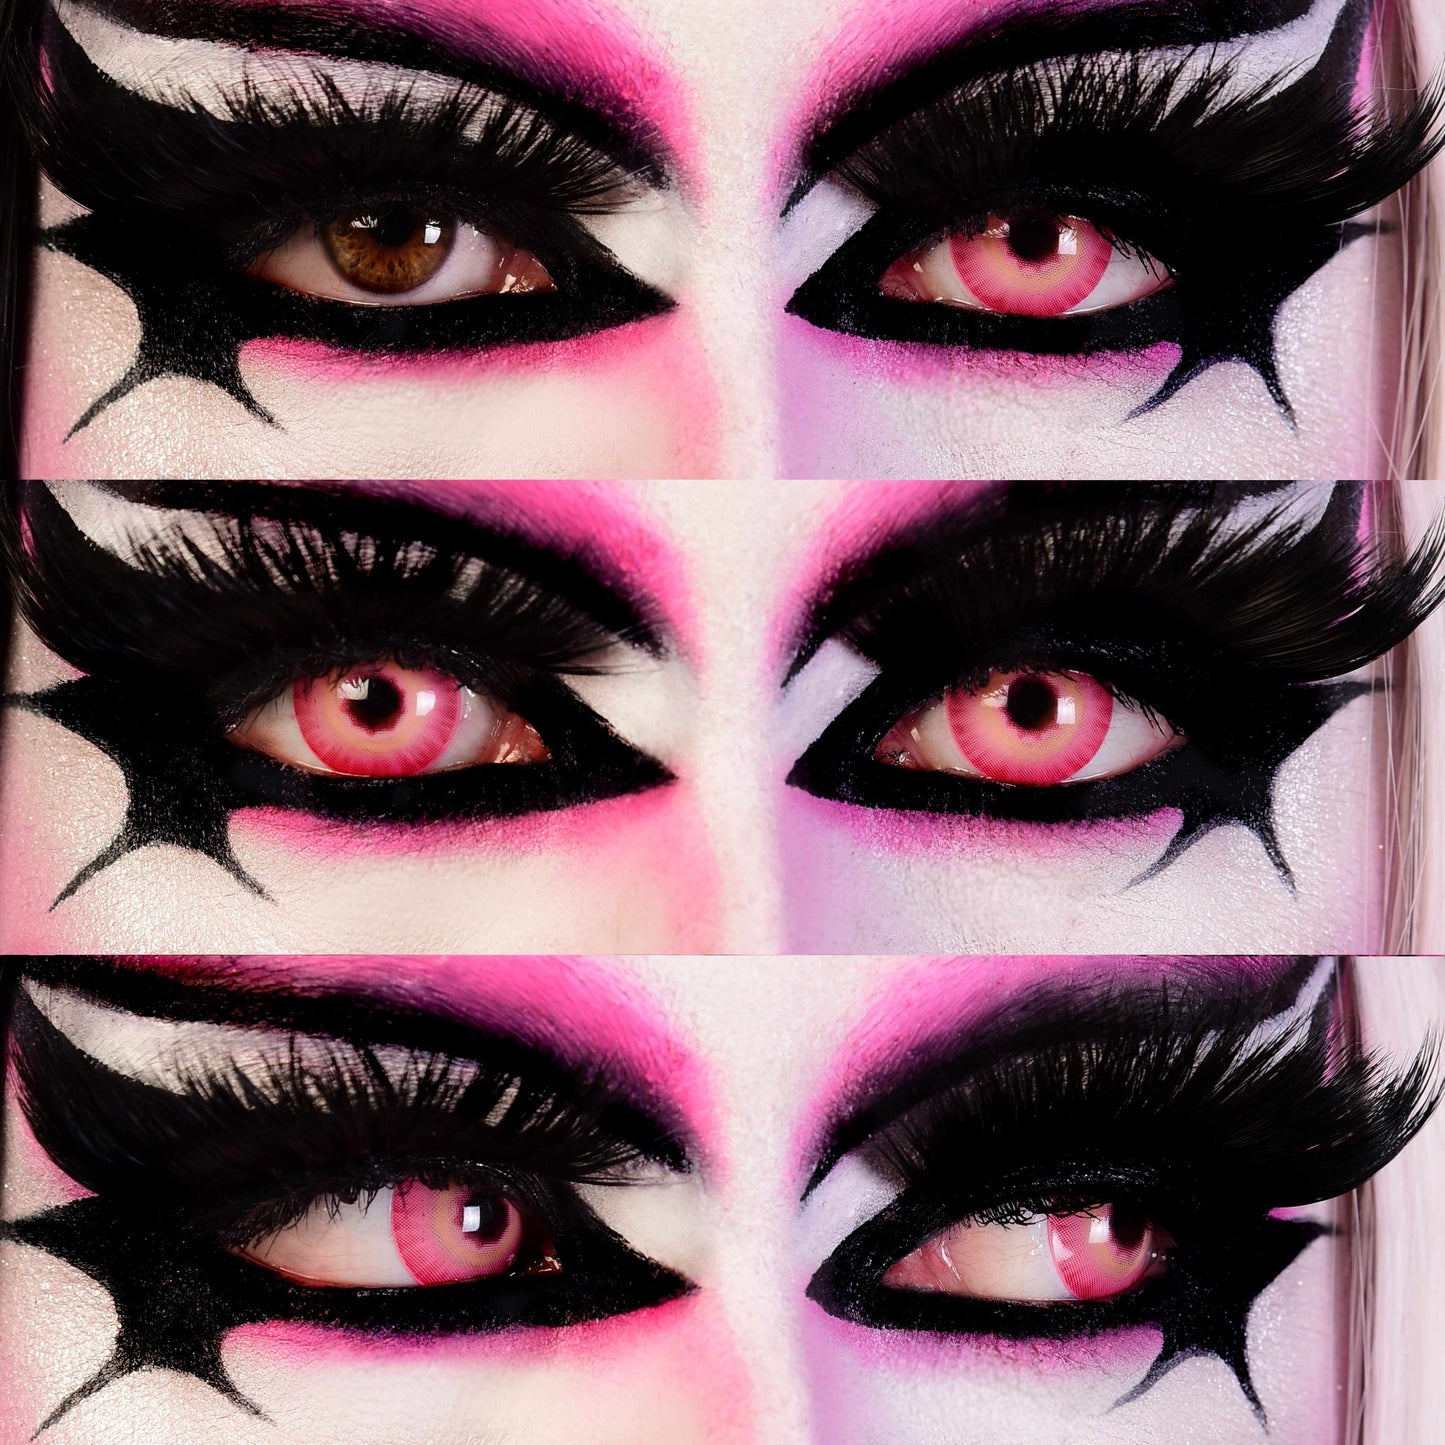 PRIMAL ® Jinx - Pink Cosplay Colored Contact lenses